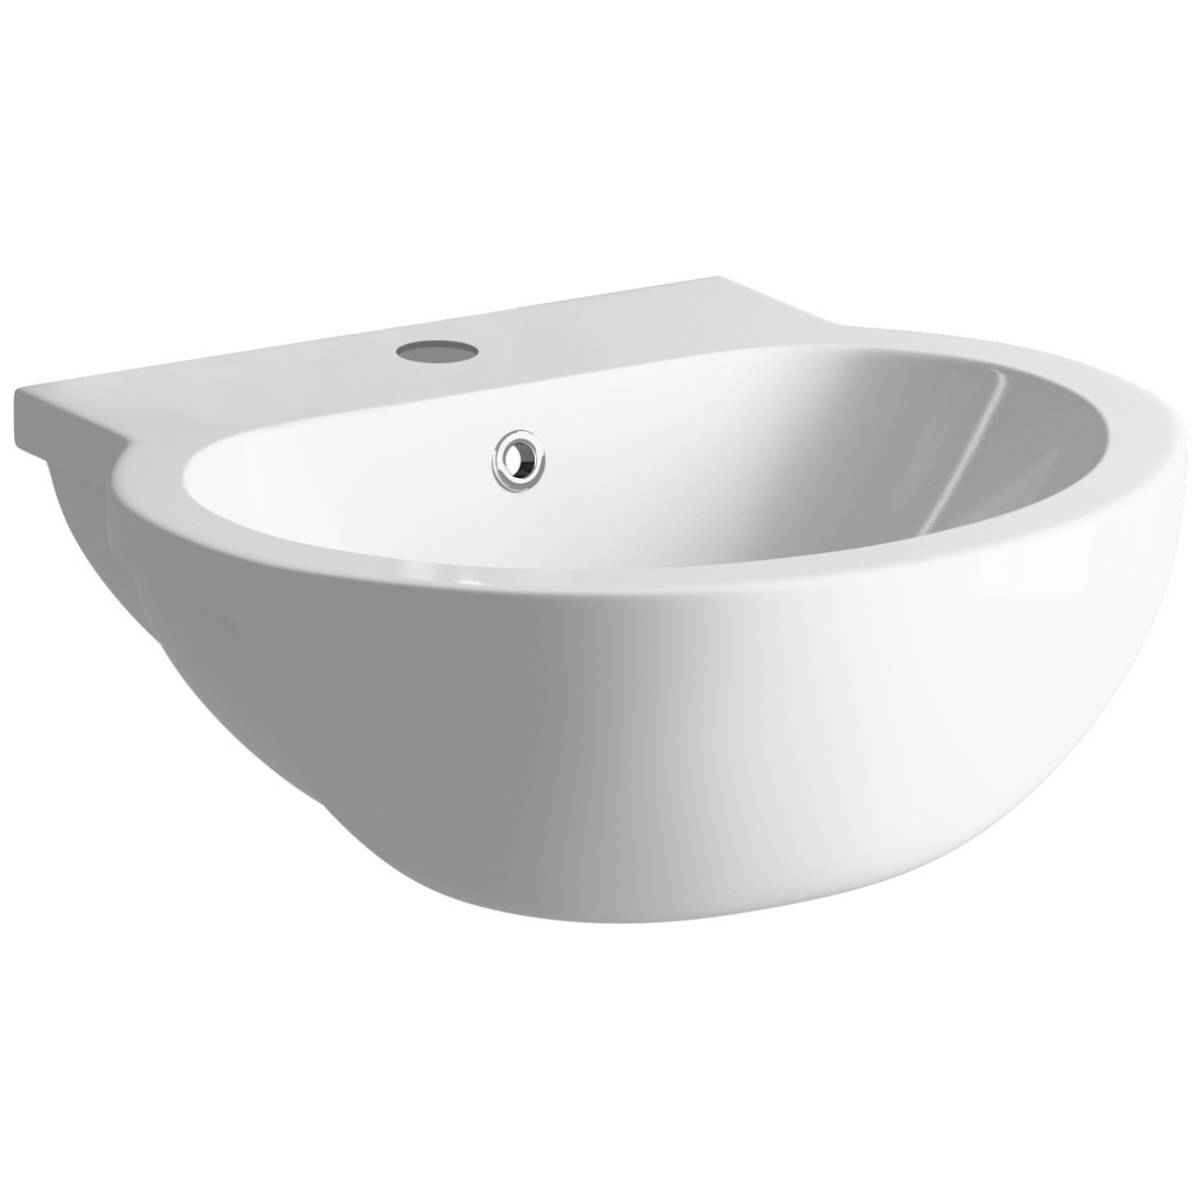 Moods Bathrooms to Love Mimosa 540mm Semi Recessed Basin (7634)